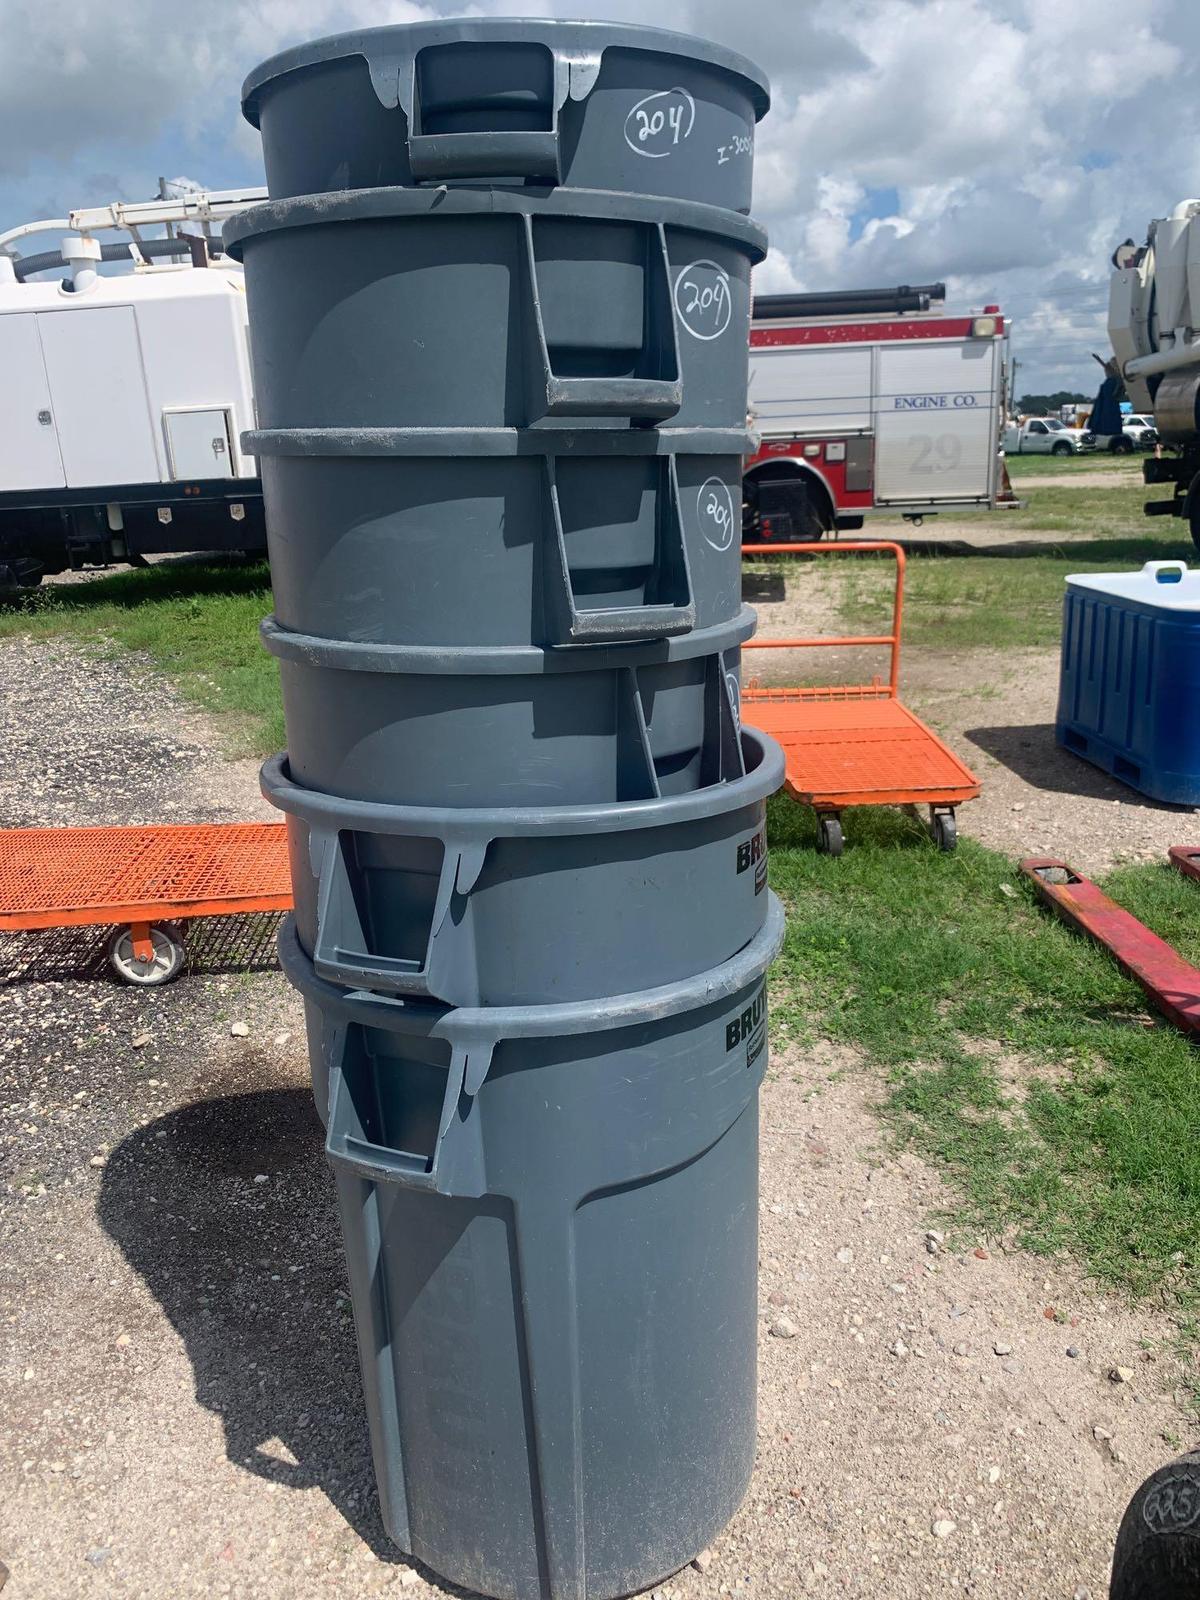 6 Rubbermaid Brute Trash Cans